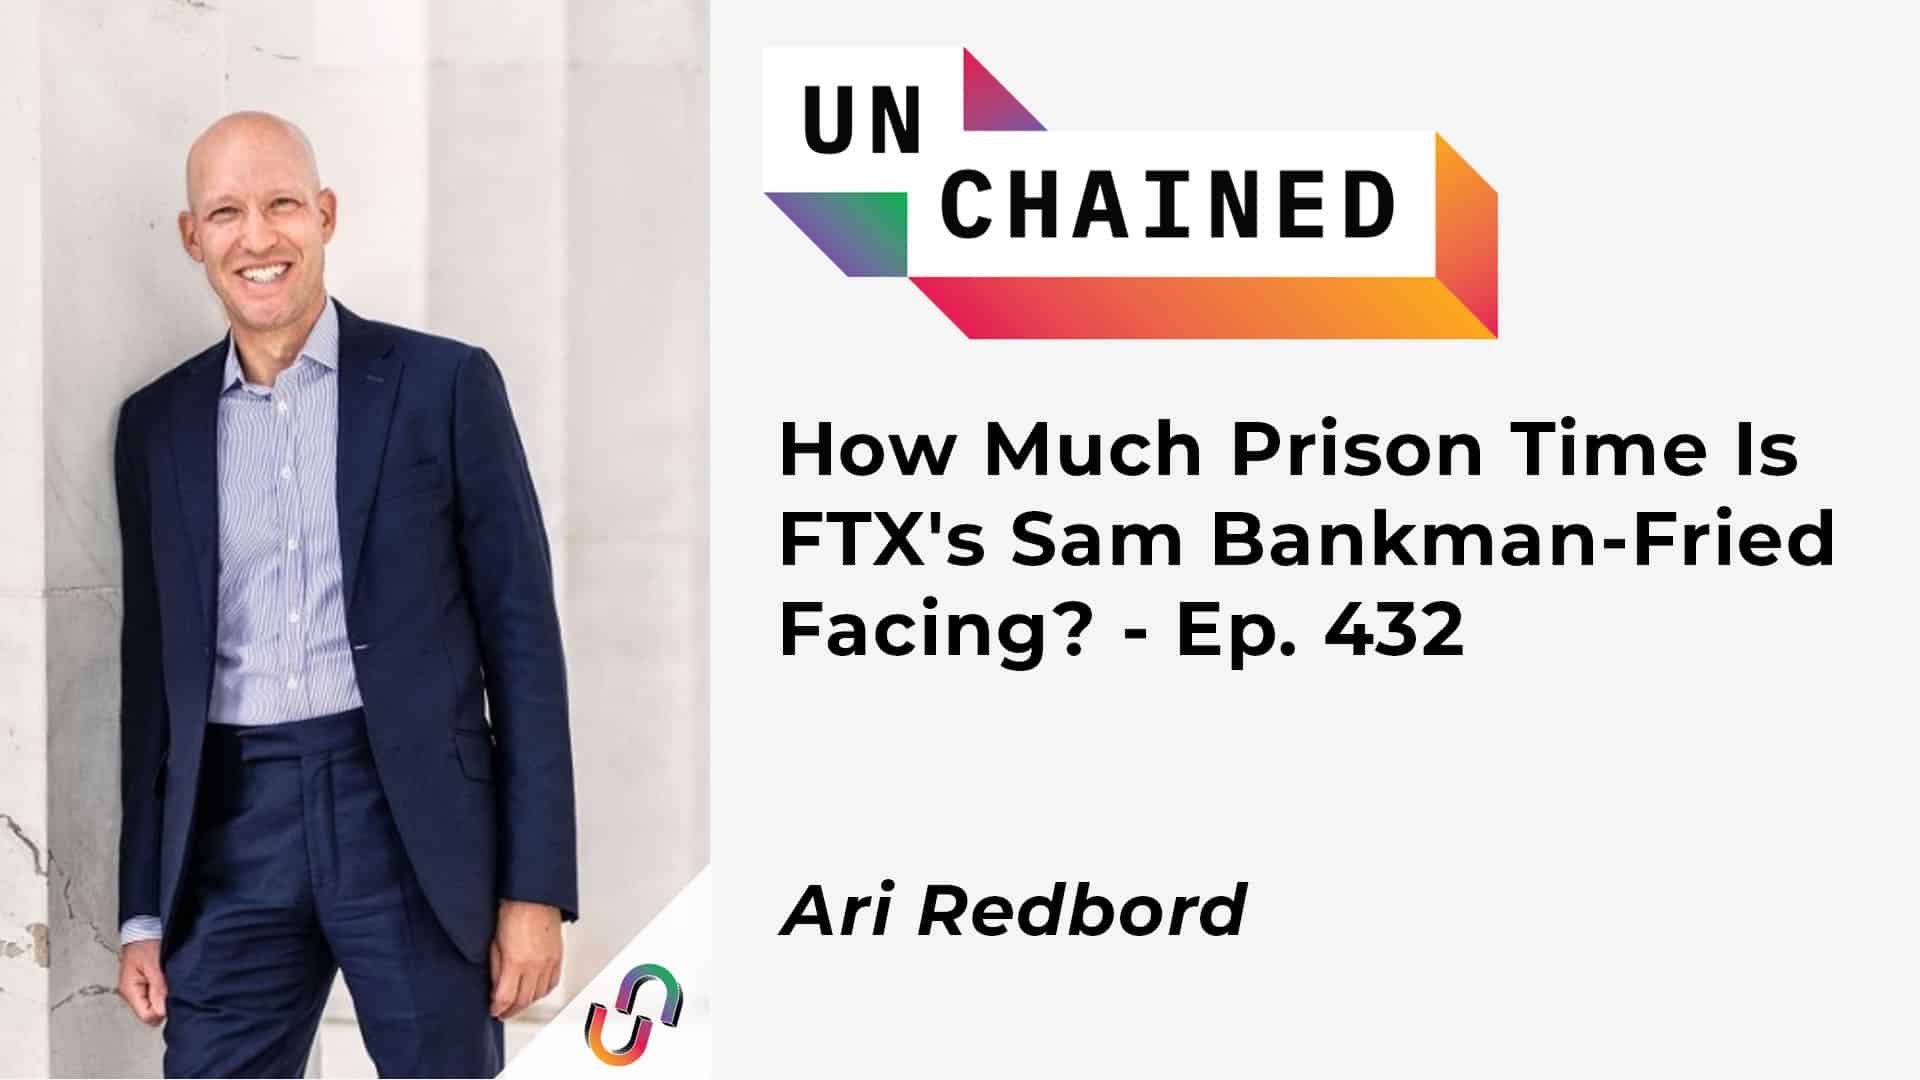 How Much Prison Time Is FTX's Sam Bankman-Fried Facing? - Ep. 432